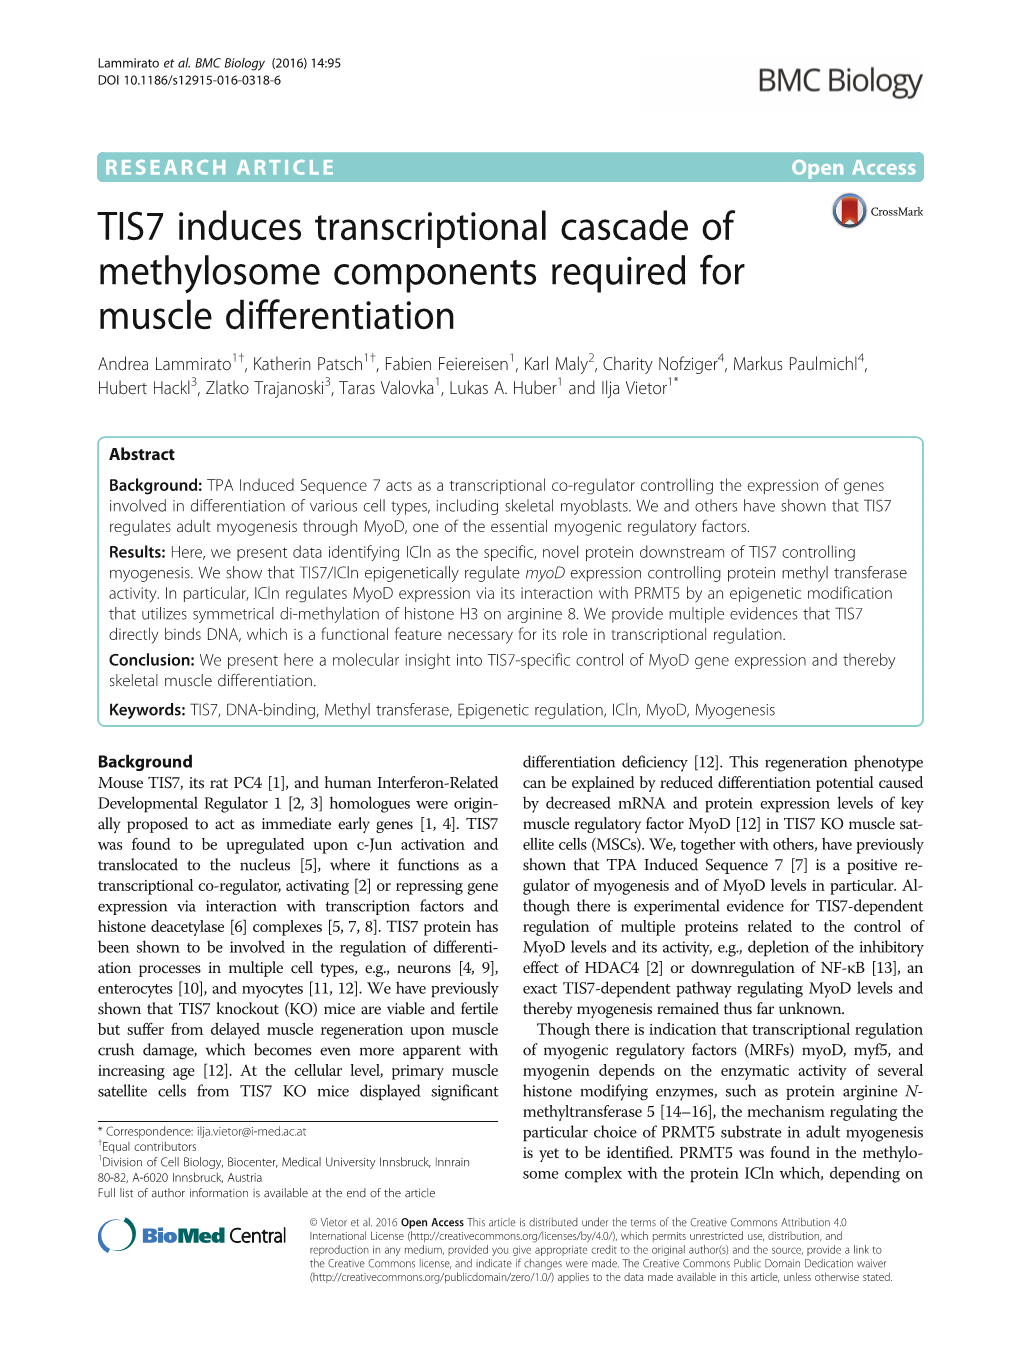 TIS7 Induces Transcriptional Cascade of Methylosome Components